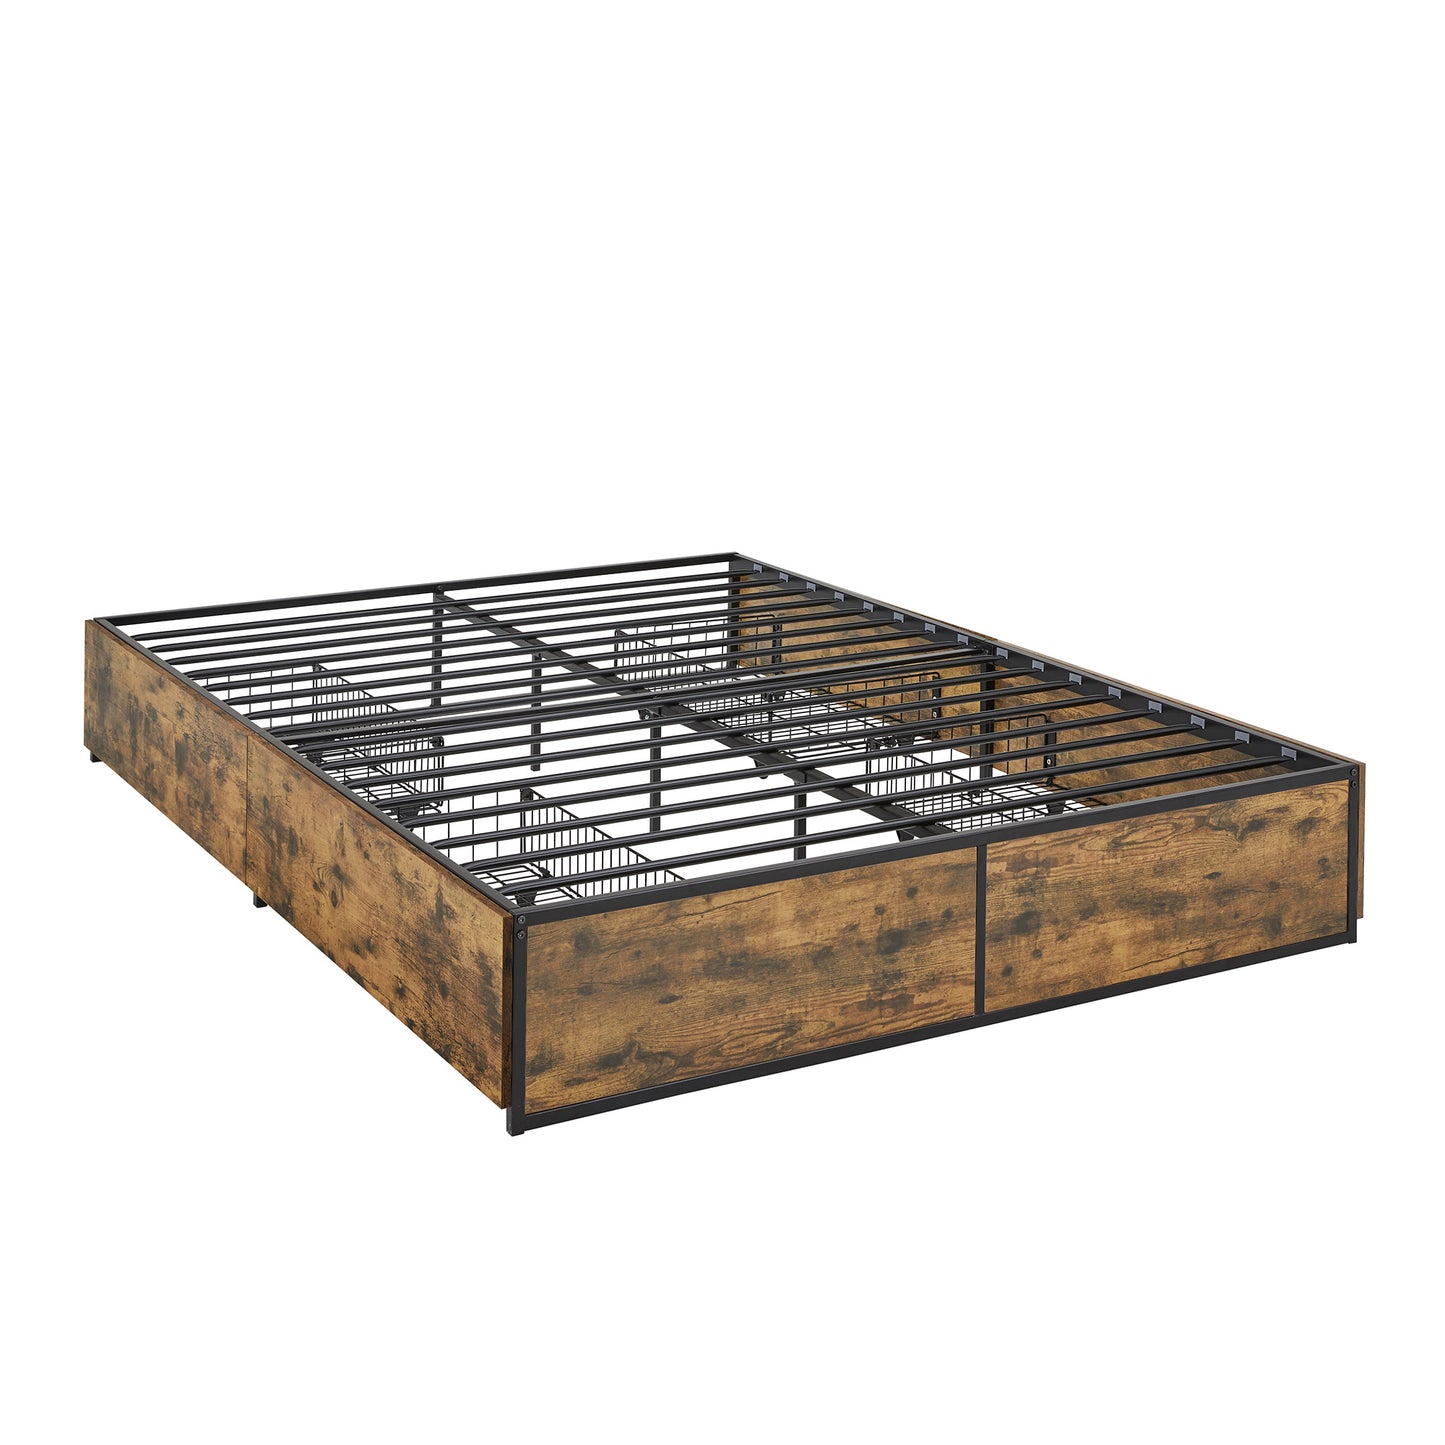 Wood Finish Panel Black Metal Platform Bed with Storage Drawers - Queen Size with 4 Wire Storage Drawers (Queen Size)